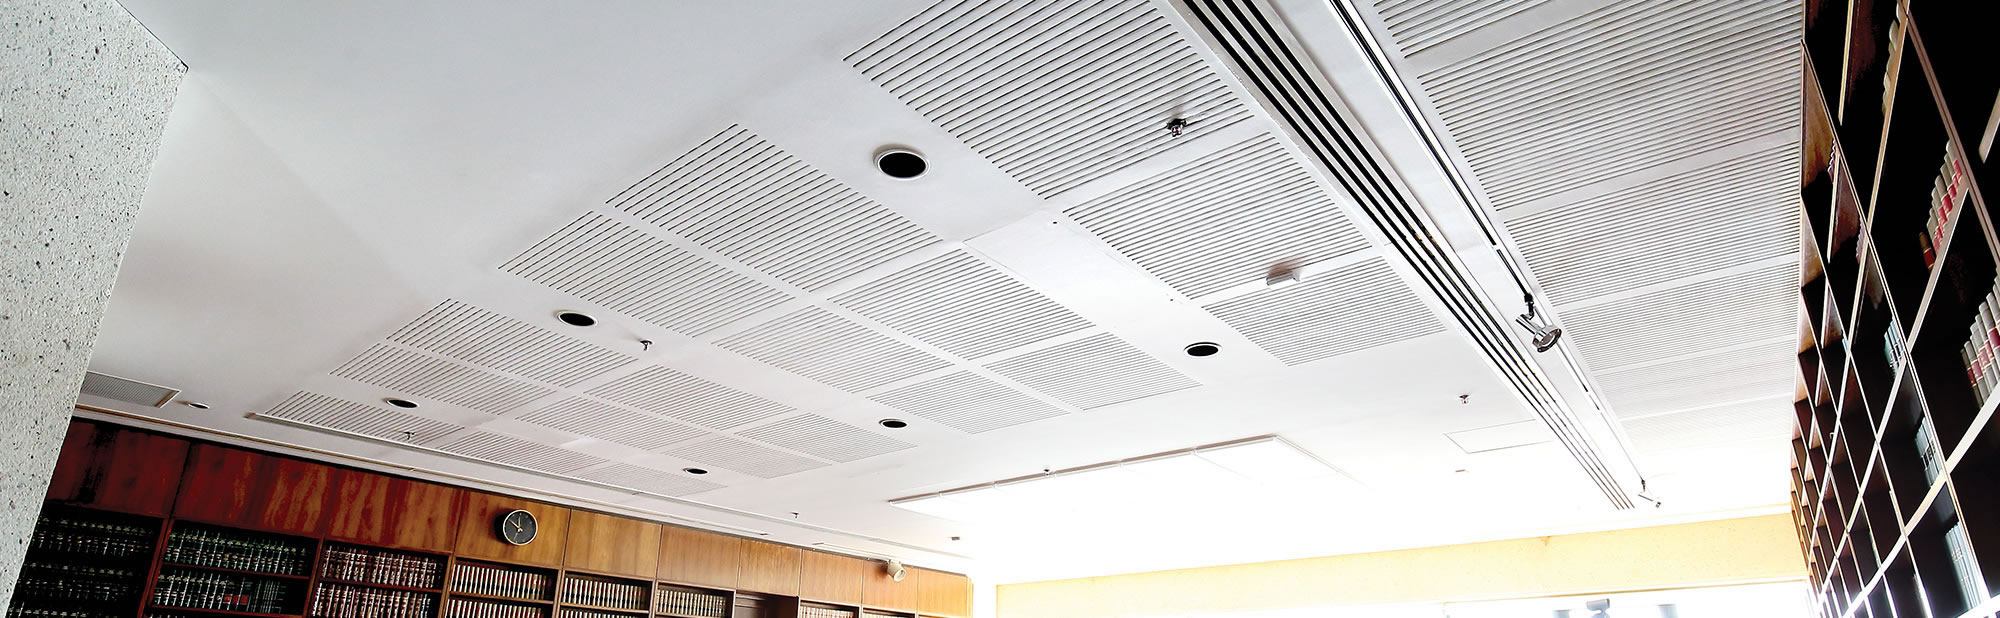 Acoustics Ceiling Tiles for government offices